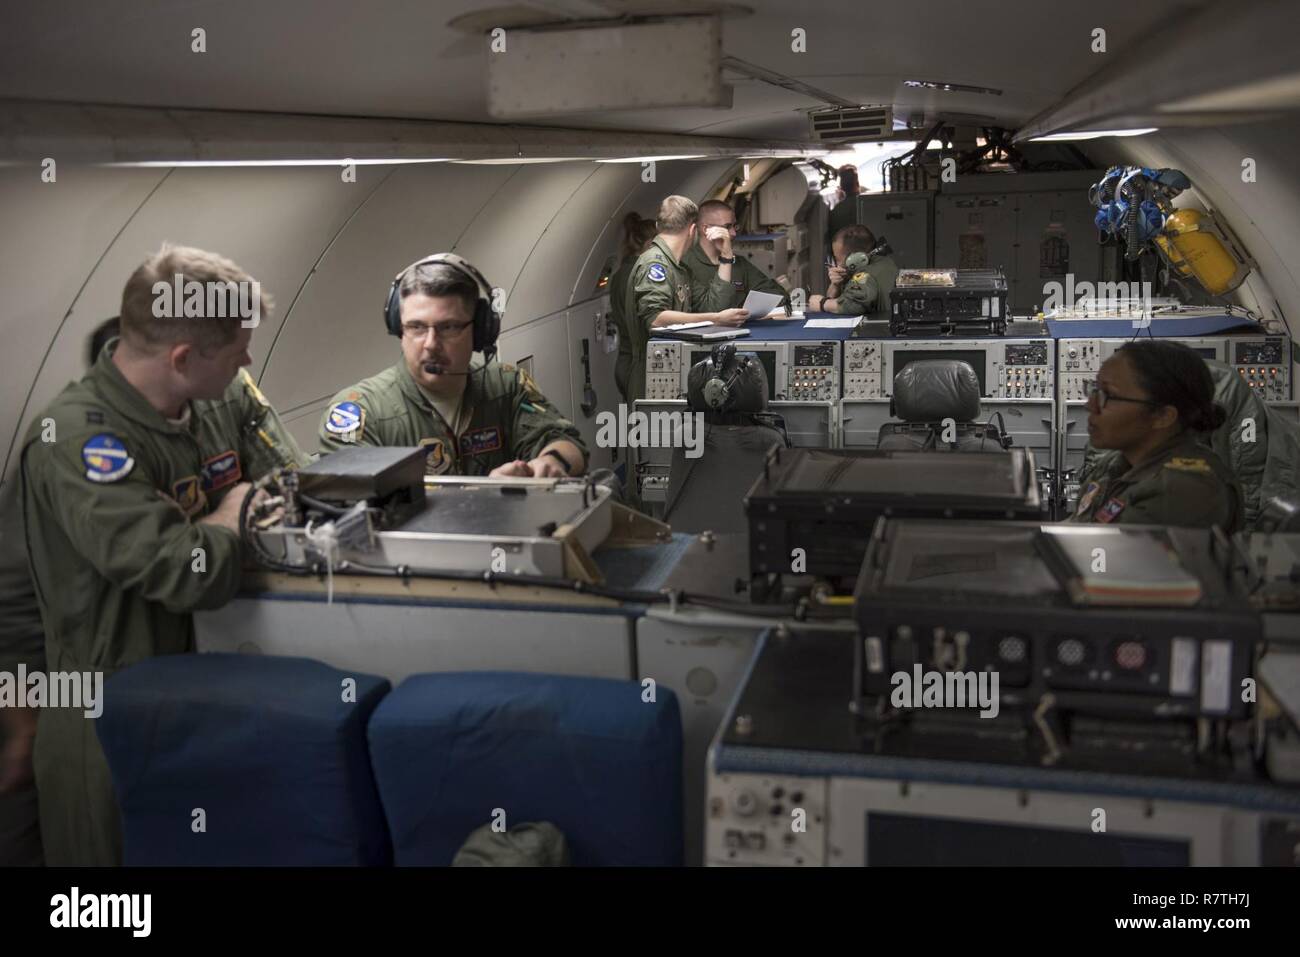 U.S. Air Force Airman 1st Class Favian Arteaga, 961st Airborne Air Control Squadron airborne surveillance technician (left), uses a communication system March 28, 2017, while flying in an E-3 Sentry over the Pacific Ocean. Airborne surveillance technicians make the initial identification of friend or foe aircraft and monitor their position. Stock Photo